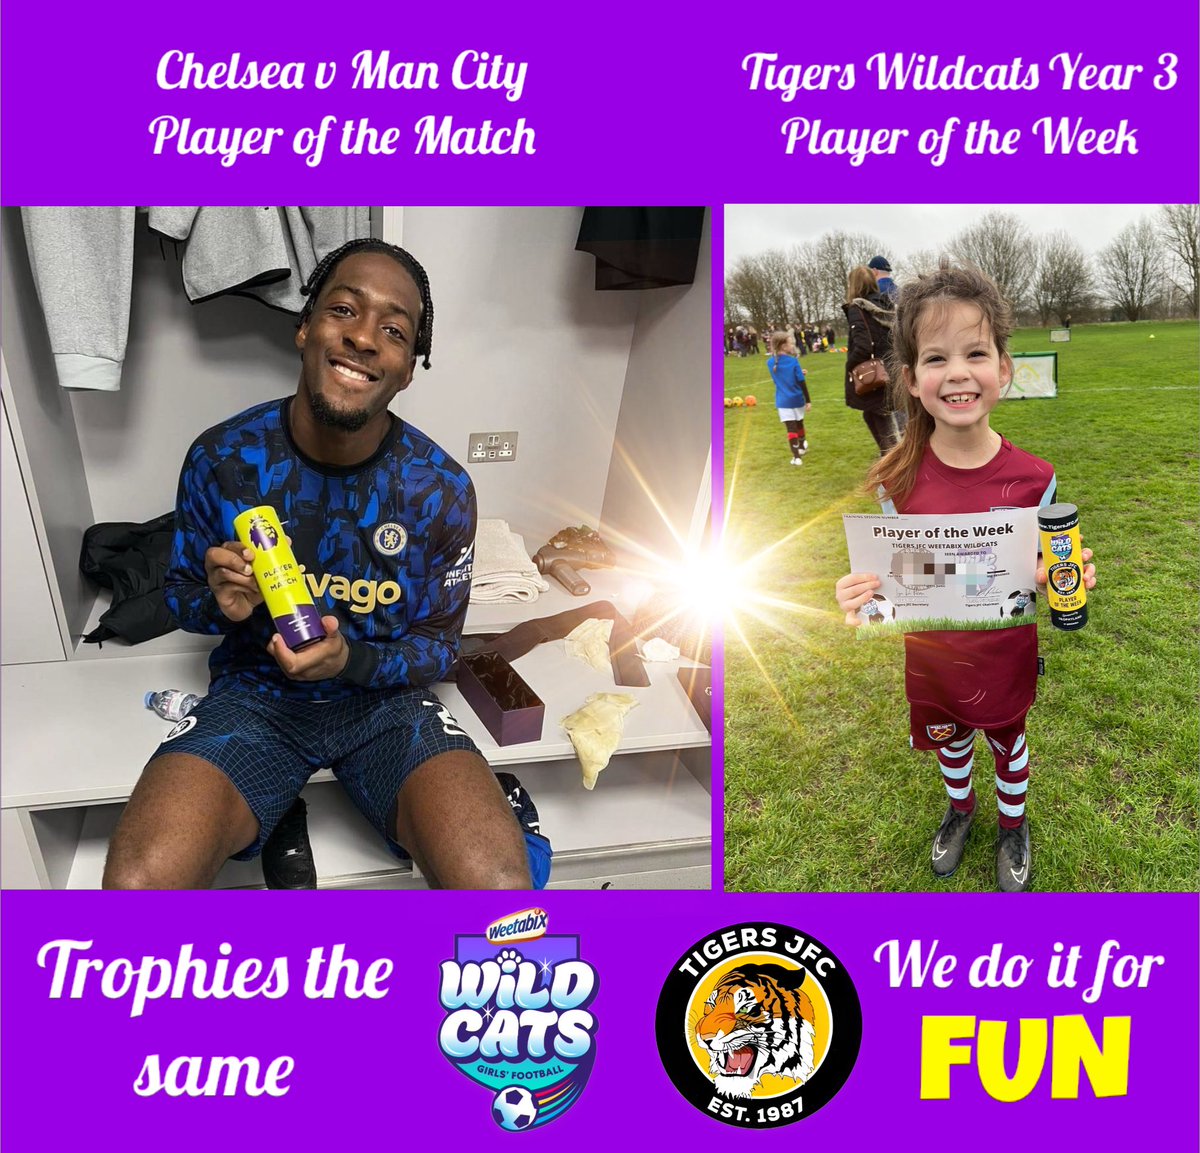 We have had 16 x Year 3’s at Tigers #weetabixwildcats over the last few weeks and now forming 2 new teams at U9’s for 24/25 season. Training over the last few weeks has been amazing and they listen, learn and all have fun together. Well done to our player of the week RF 👍🏻